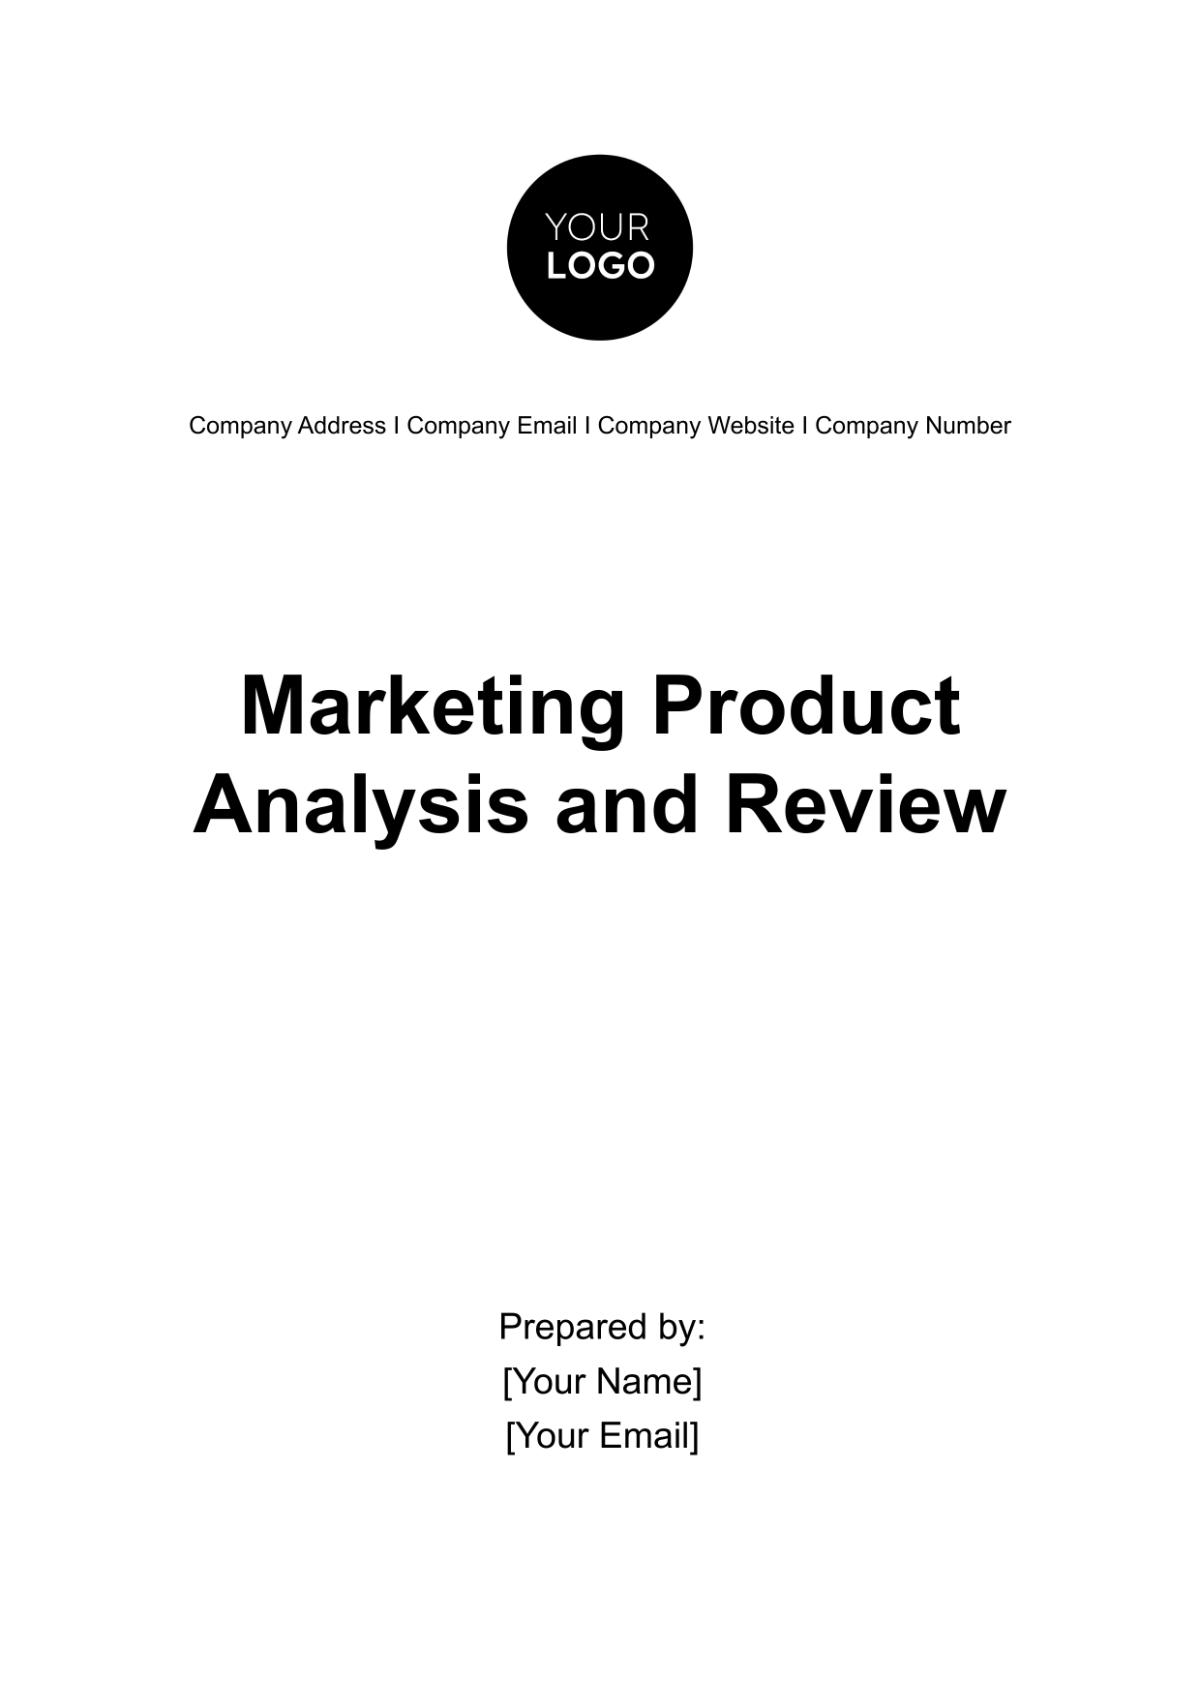 Free Marketing Product Analysis and Review Template